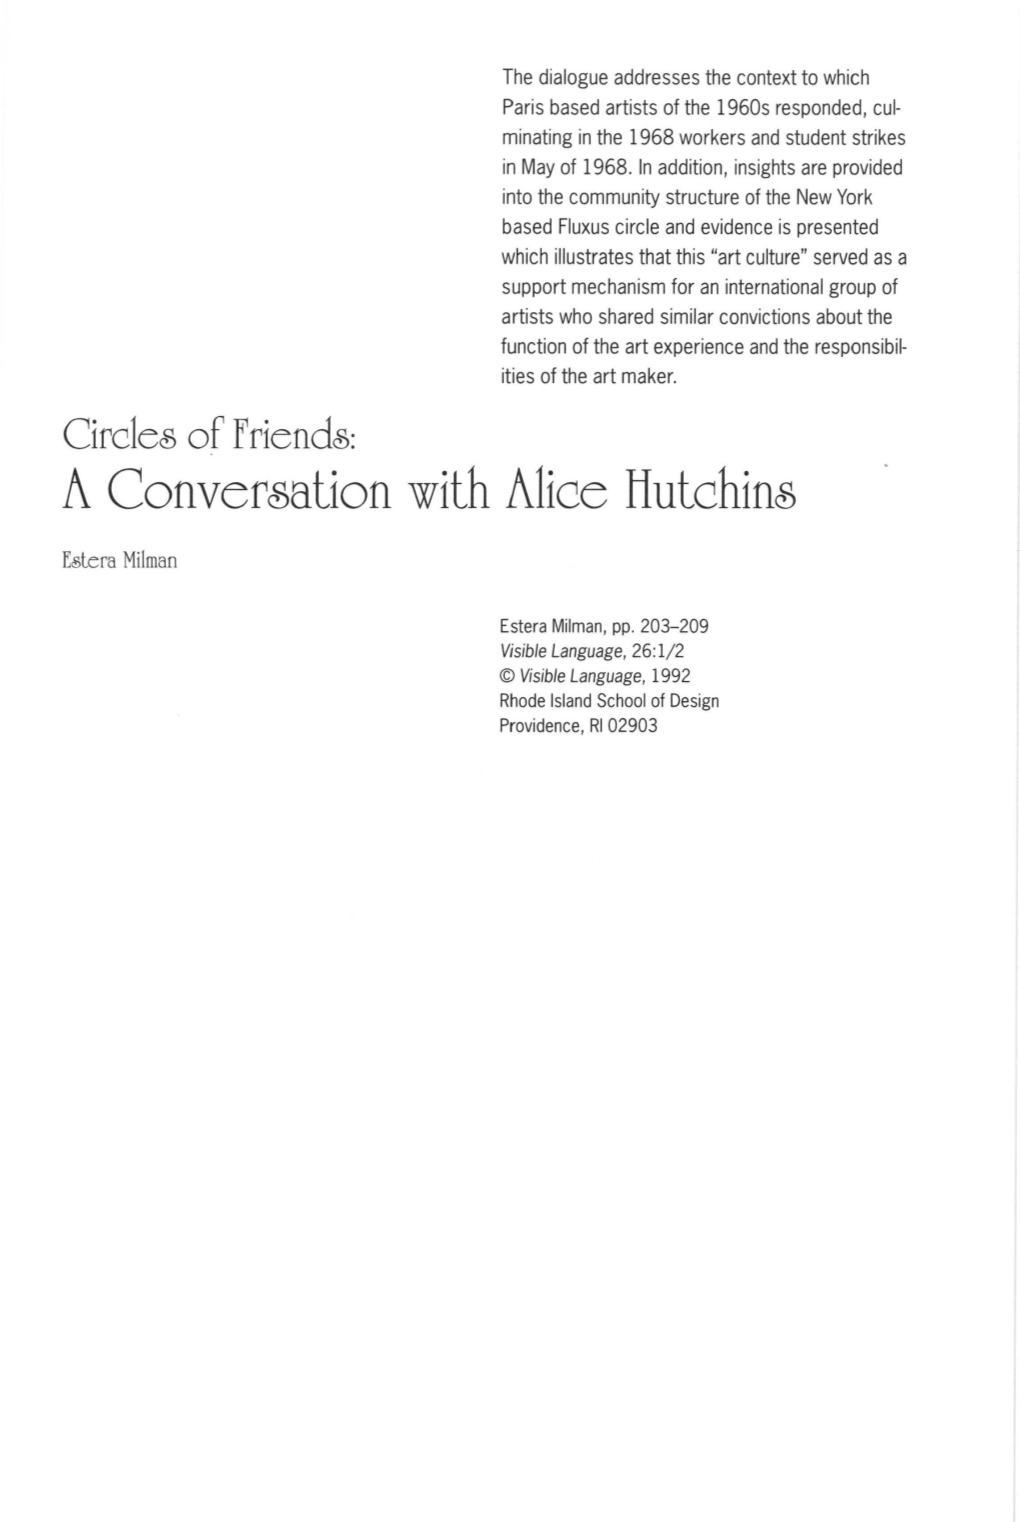 A Conversation with Alice Hutchins